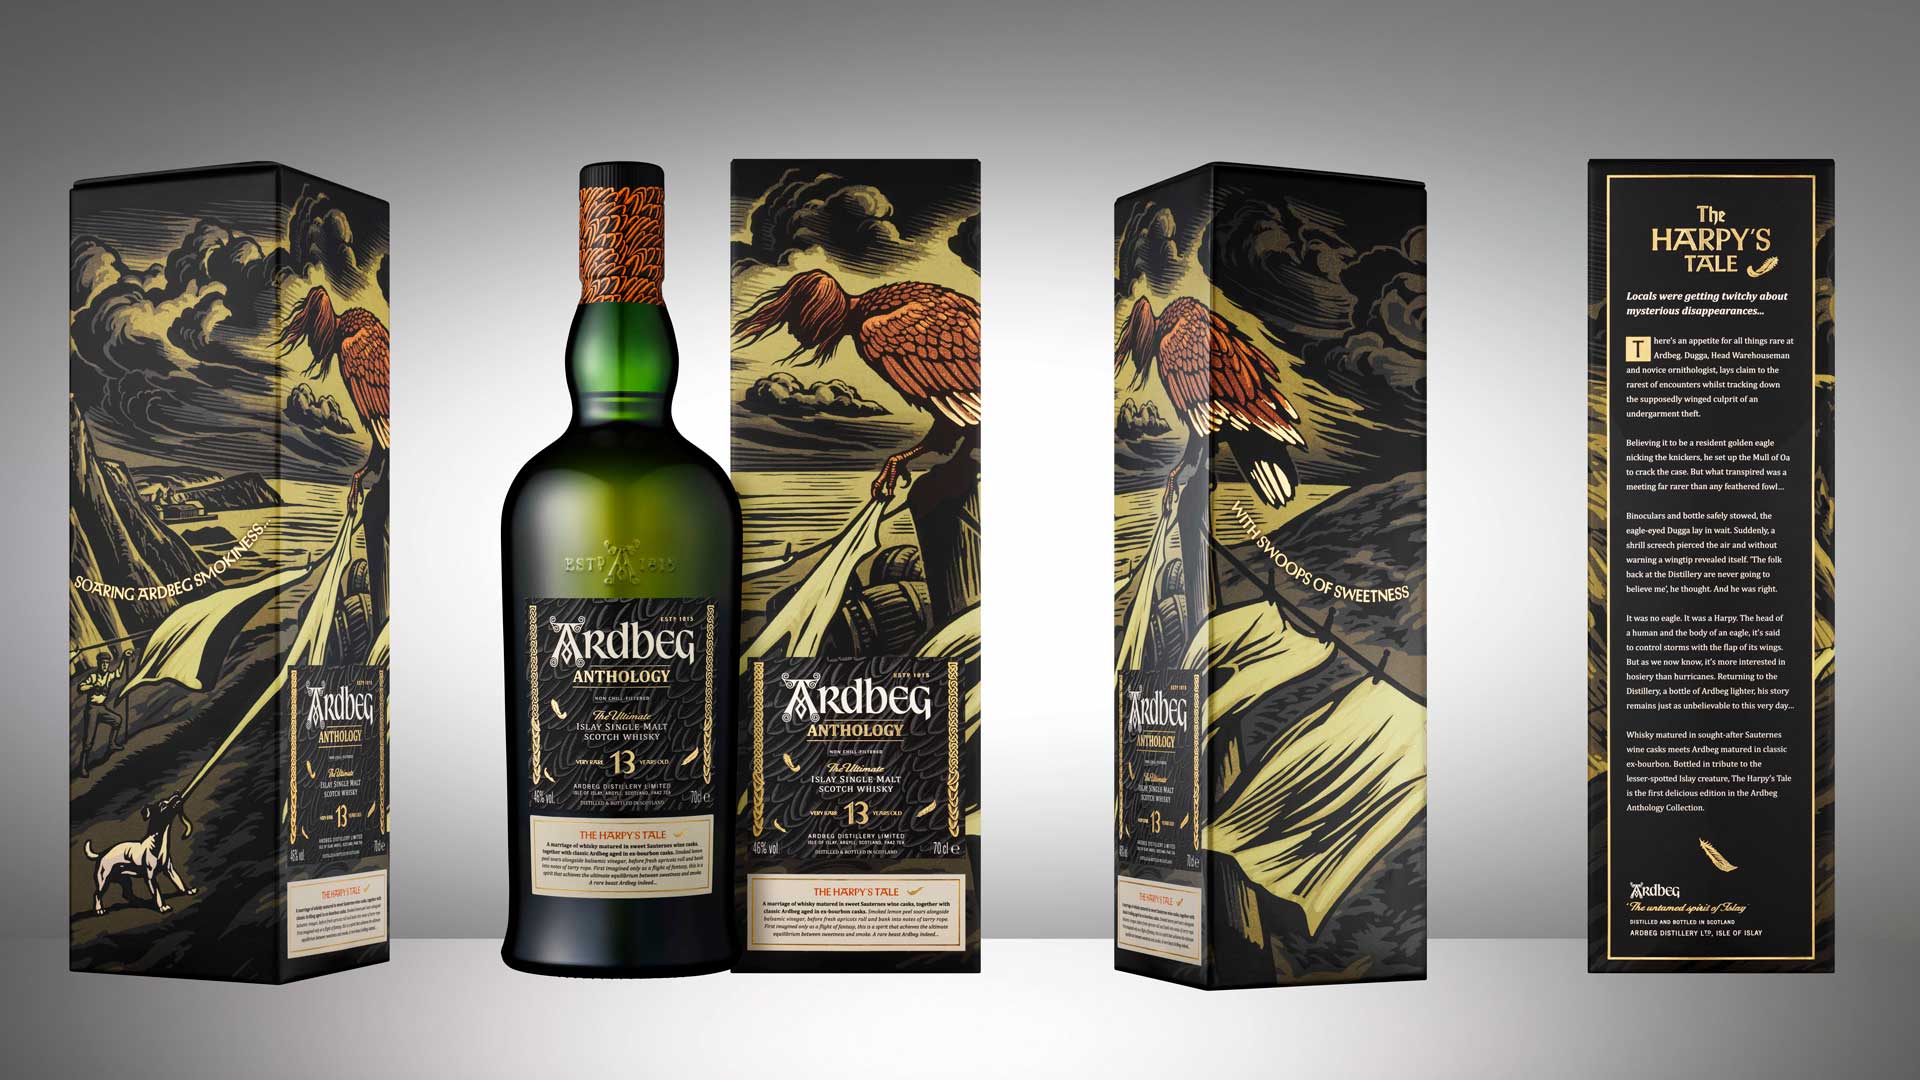 Ardbeg-Harpy’s-Tale-limited-edition-coqtail-milano